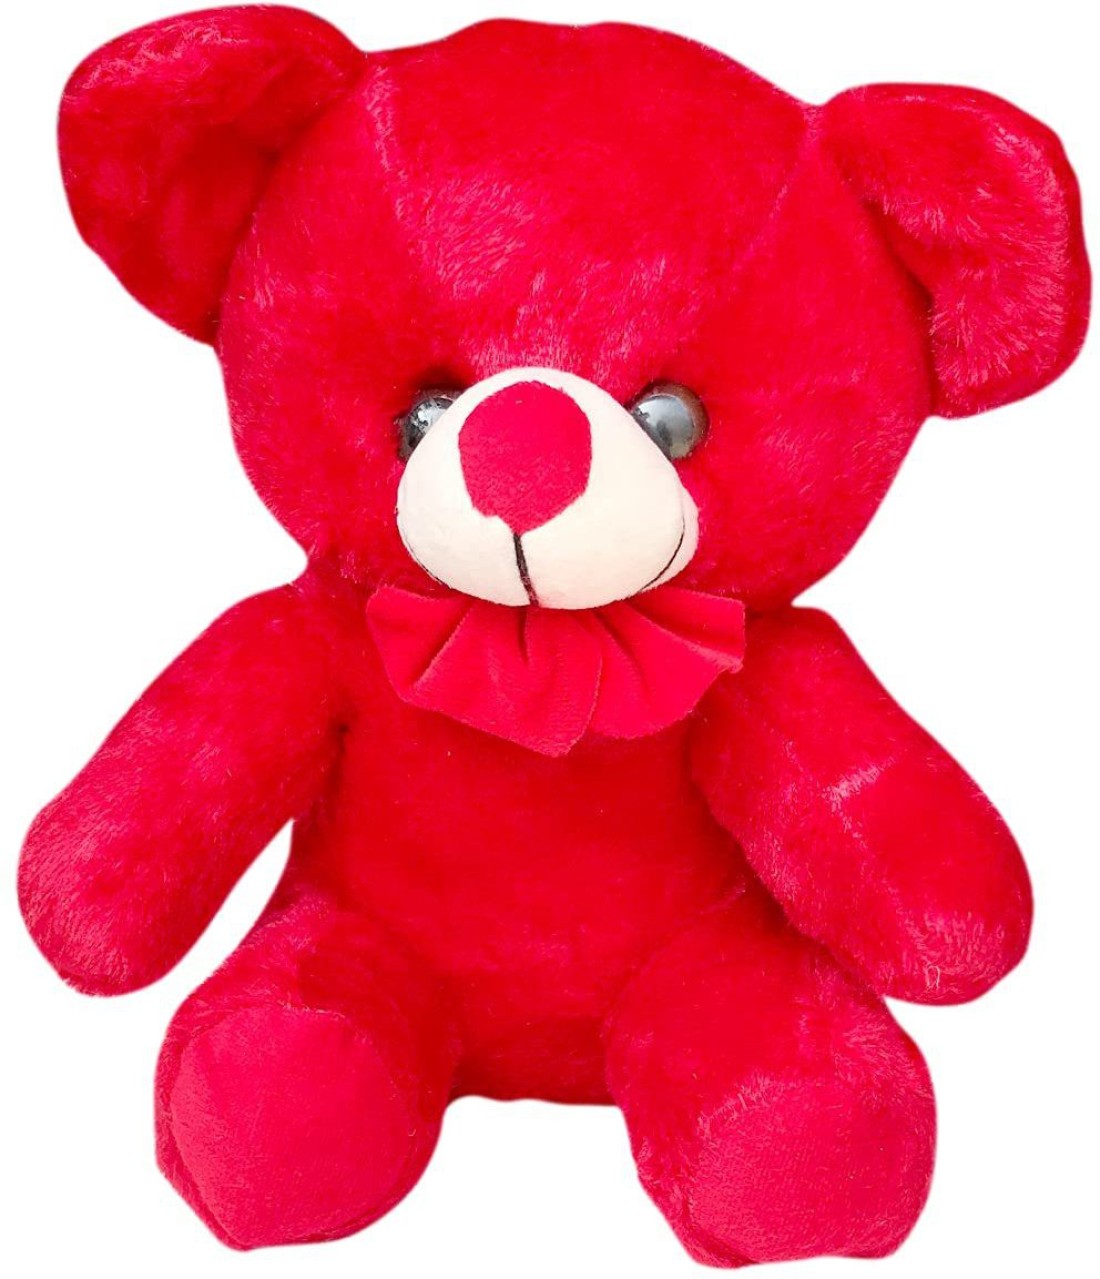 Toys Adventure Red Teddy Bear Soft Toy (20X15X35cm) Pack of 1 - 35 ...